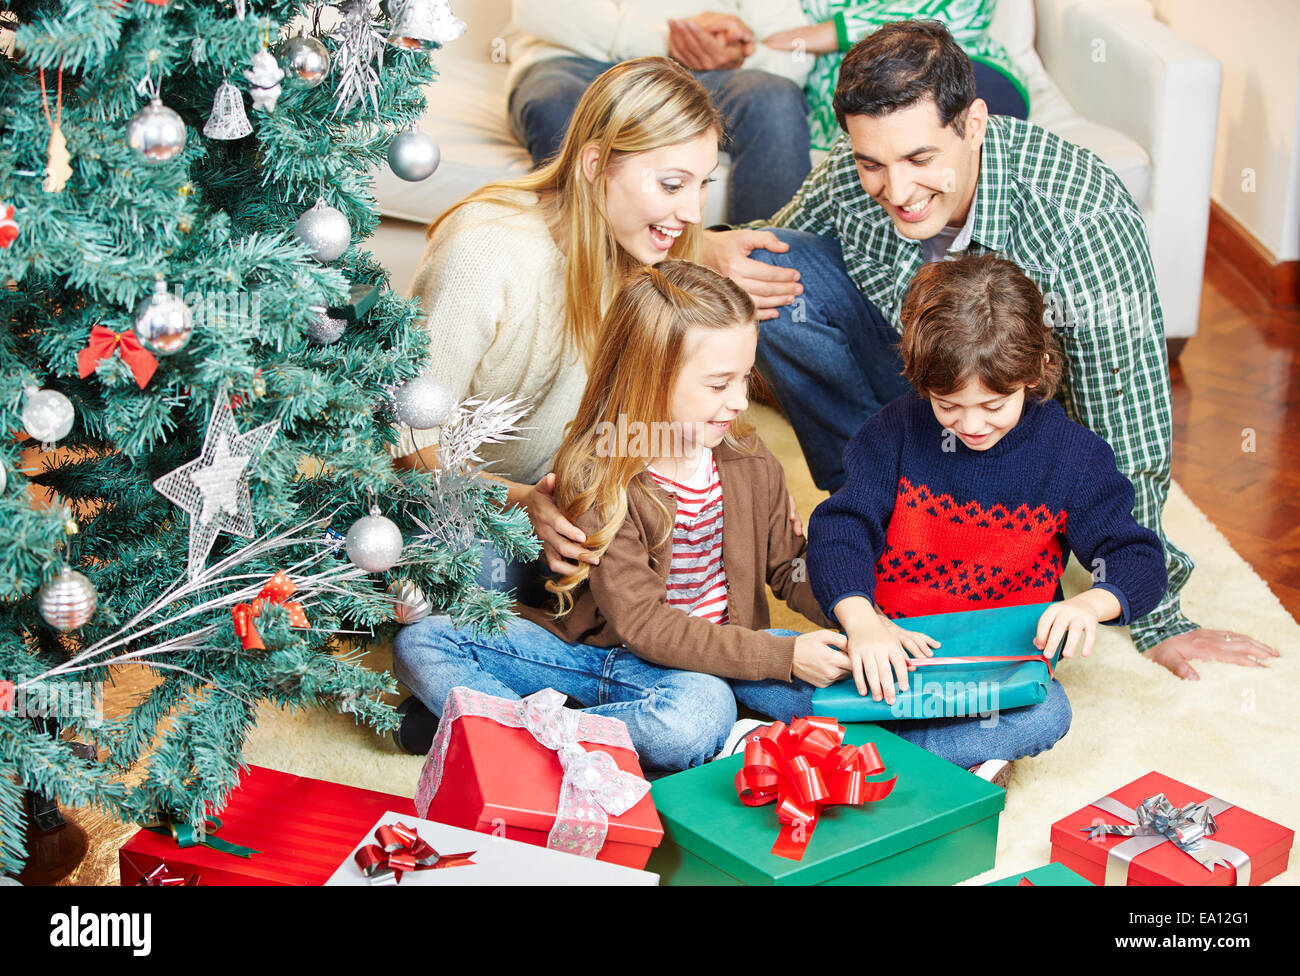 Children opening gifts at christmas eve while the family is watching Stock Photo